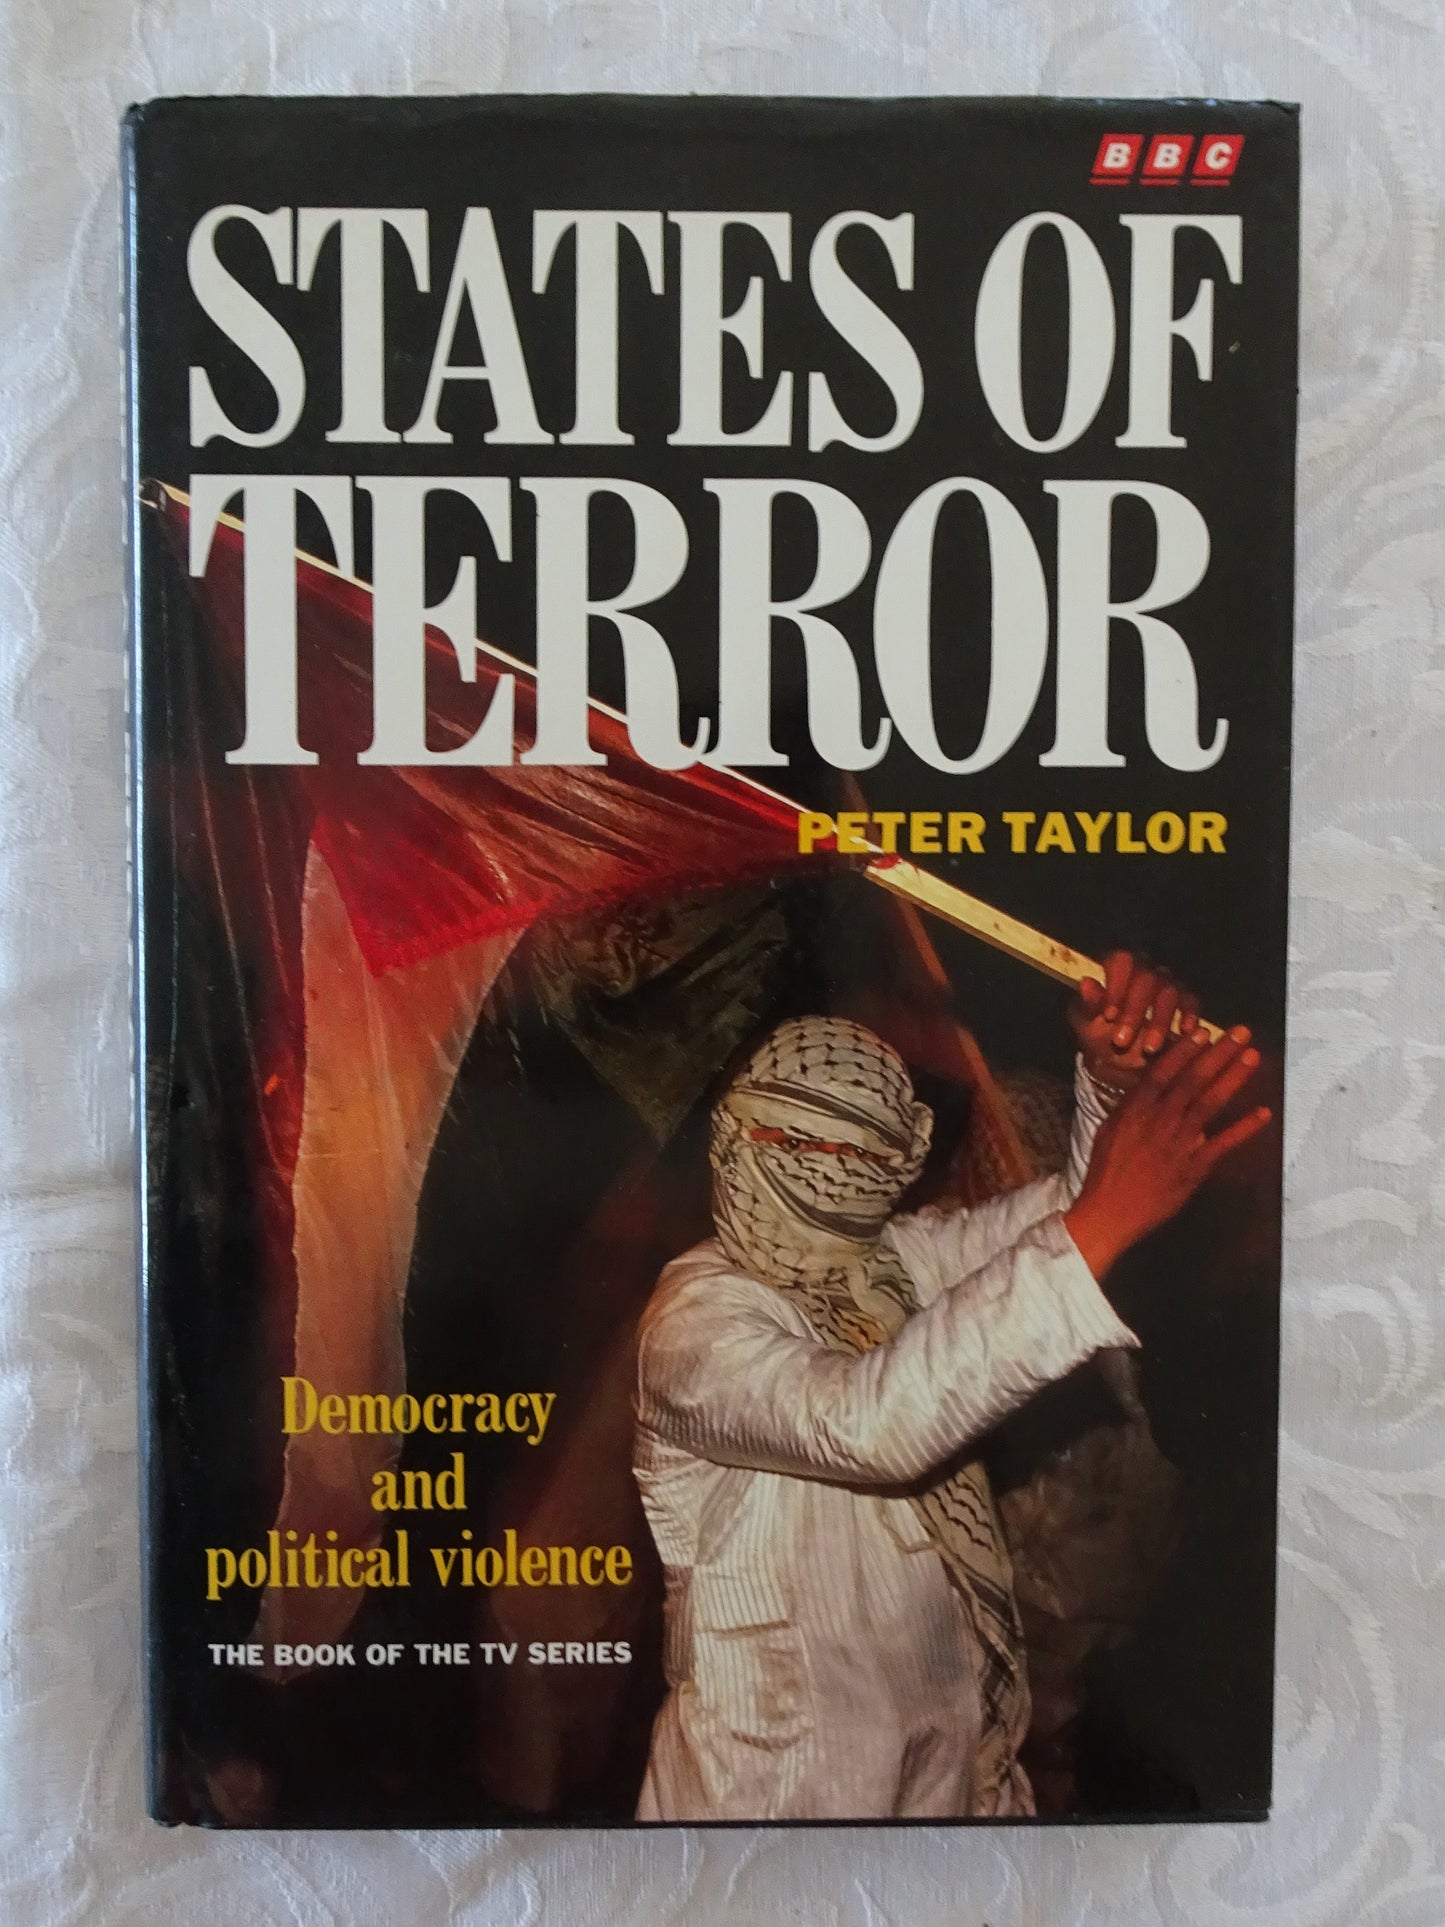 States of Terror by Peter Taylor